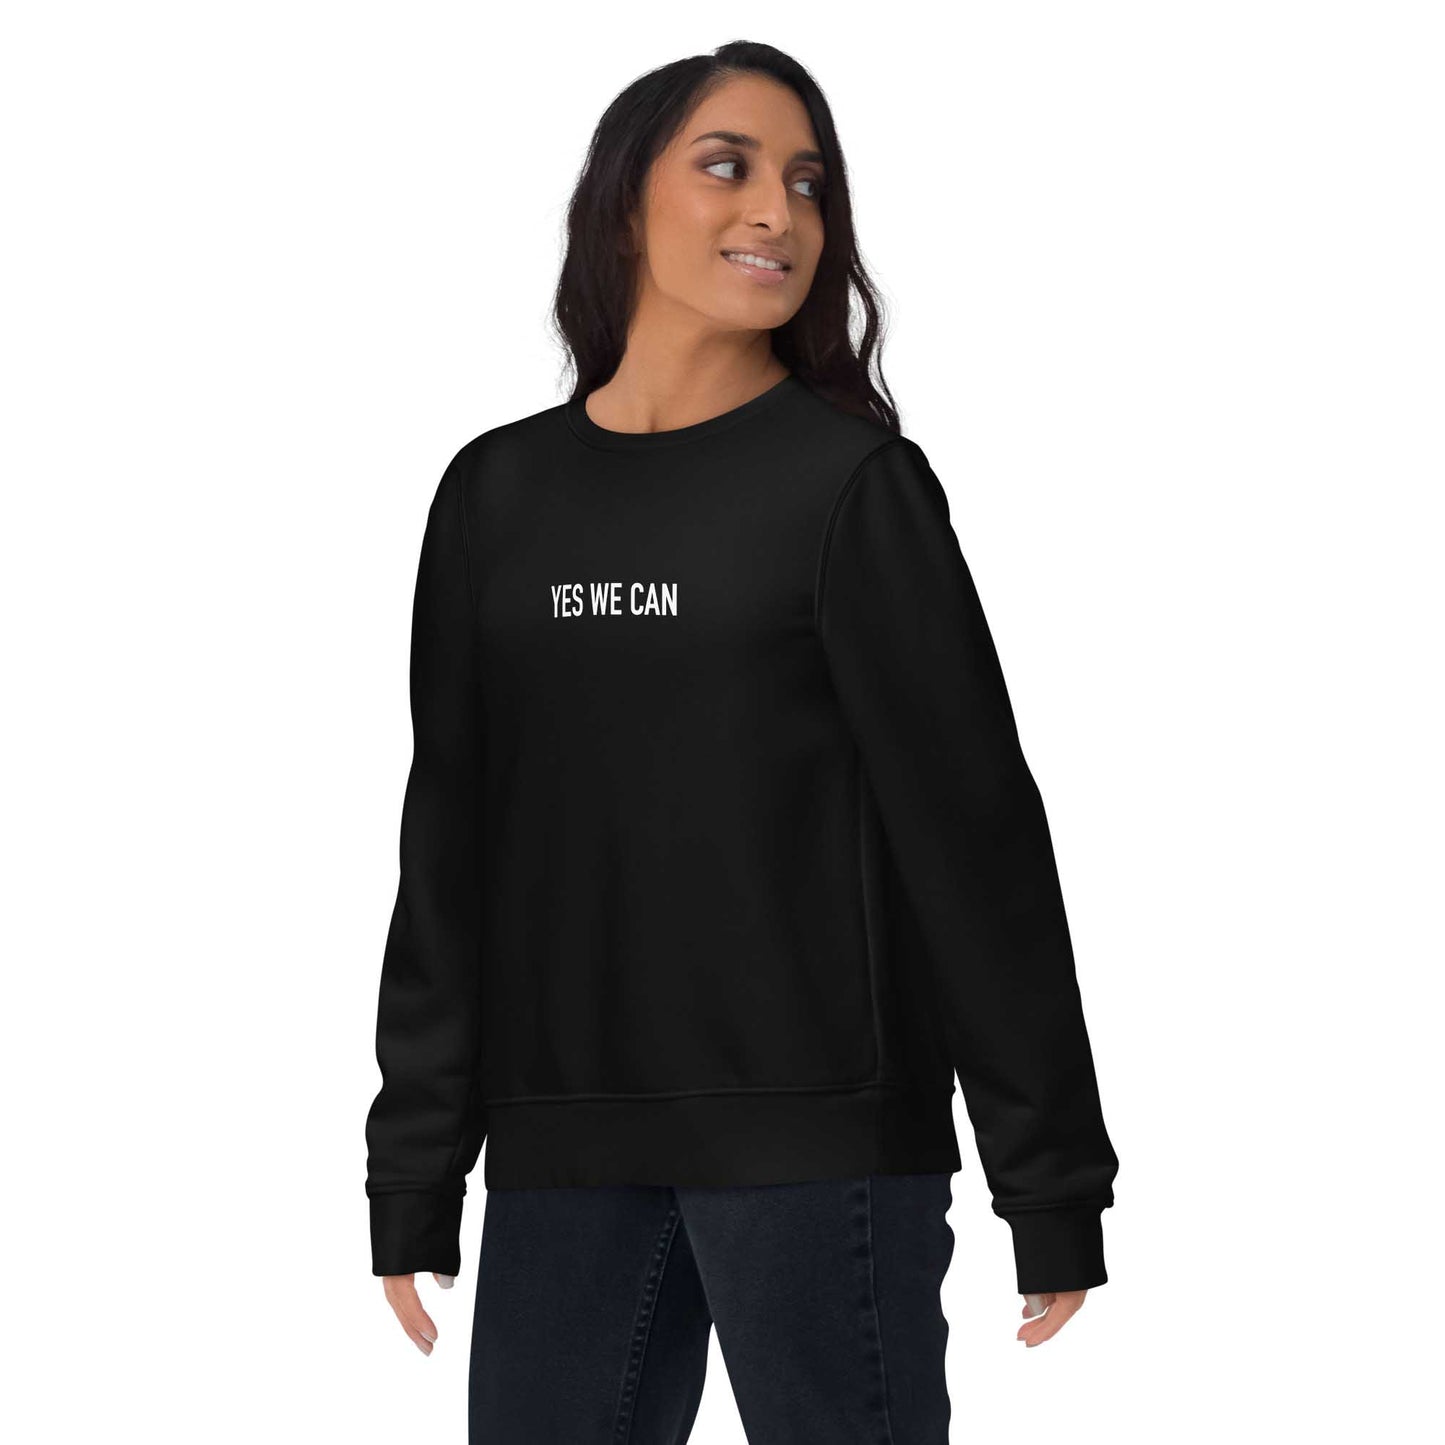 Women black sustainable sweatshirt with Barack Obama's inspirational quote, "Yes We Can." 